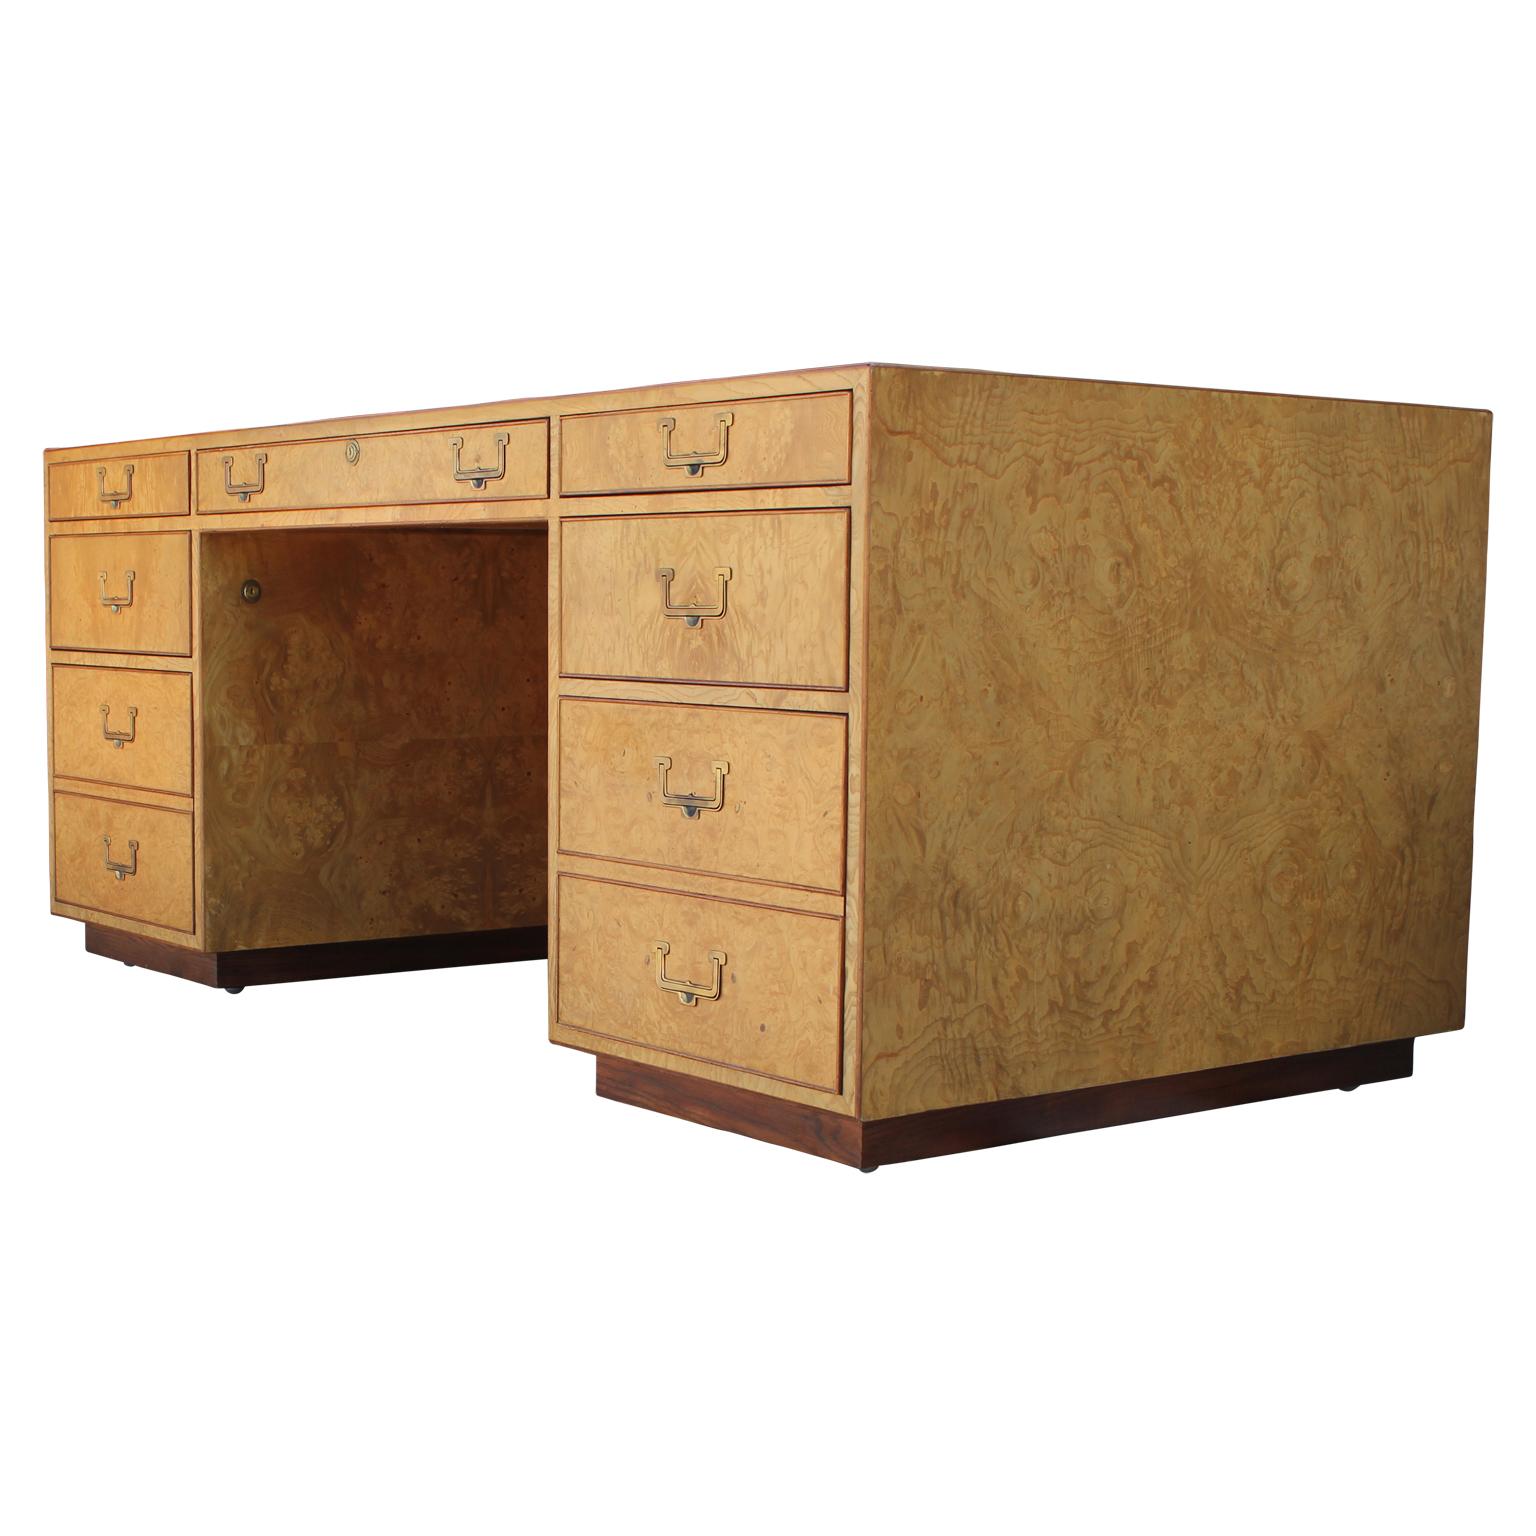 Spectacular modern Campaign style burl wood executive desk with brass hardware designed by John Widdicomb. This piece features nine drawers and a secret pull out panel on the back for an additional work space.